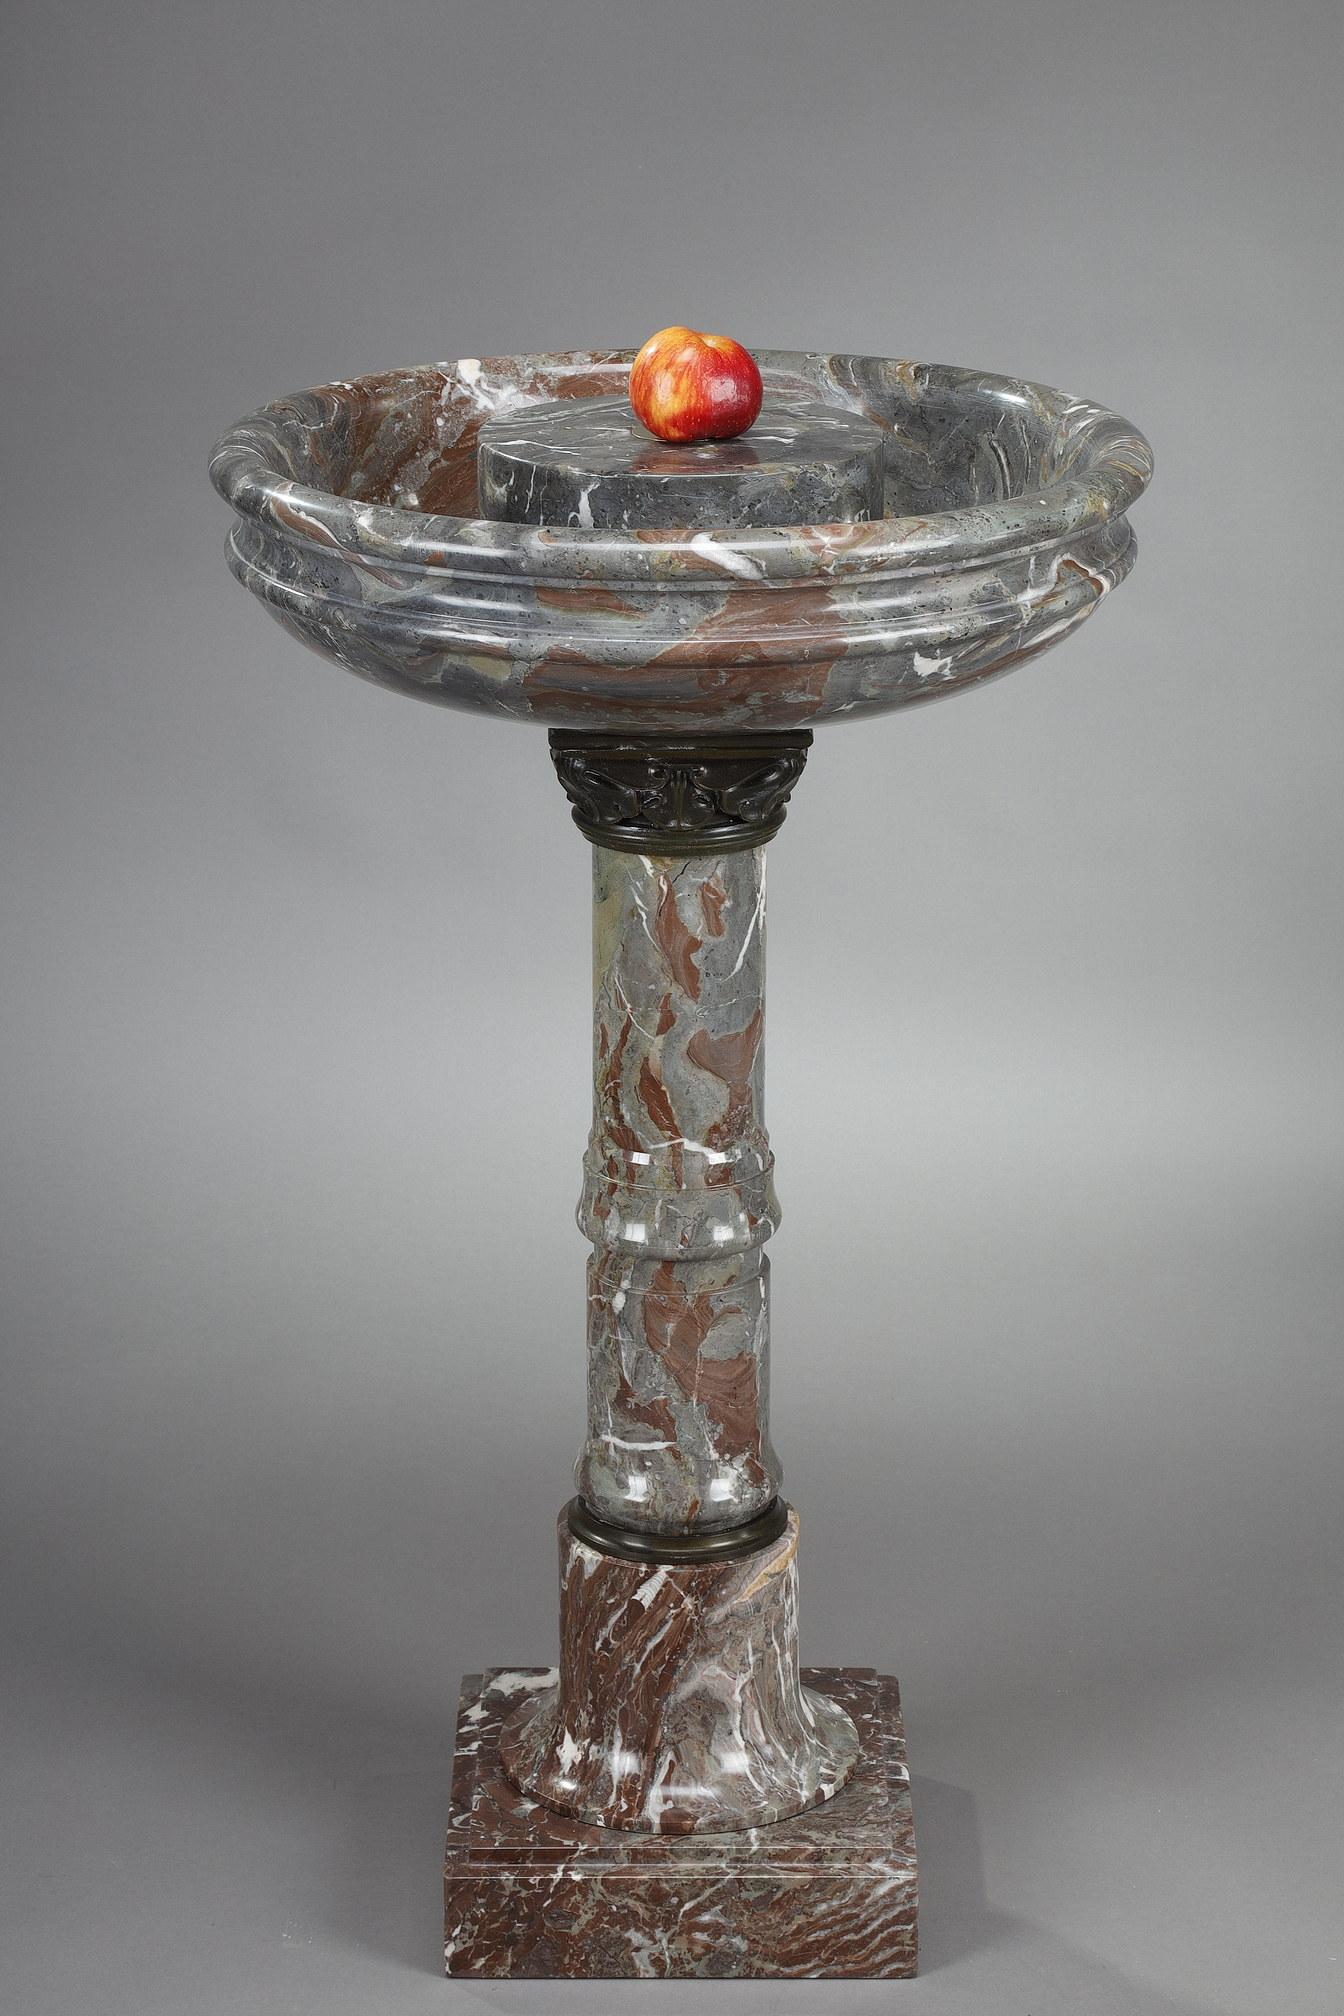 A grey and red marble birdbath. It rests on a shaft in the form of a ringed column. The capital of water leaves is in patinated bronze. The round basin with its moulded lip has a central pedestal that can accommodate a sculpture. The whole rests on